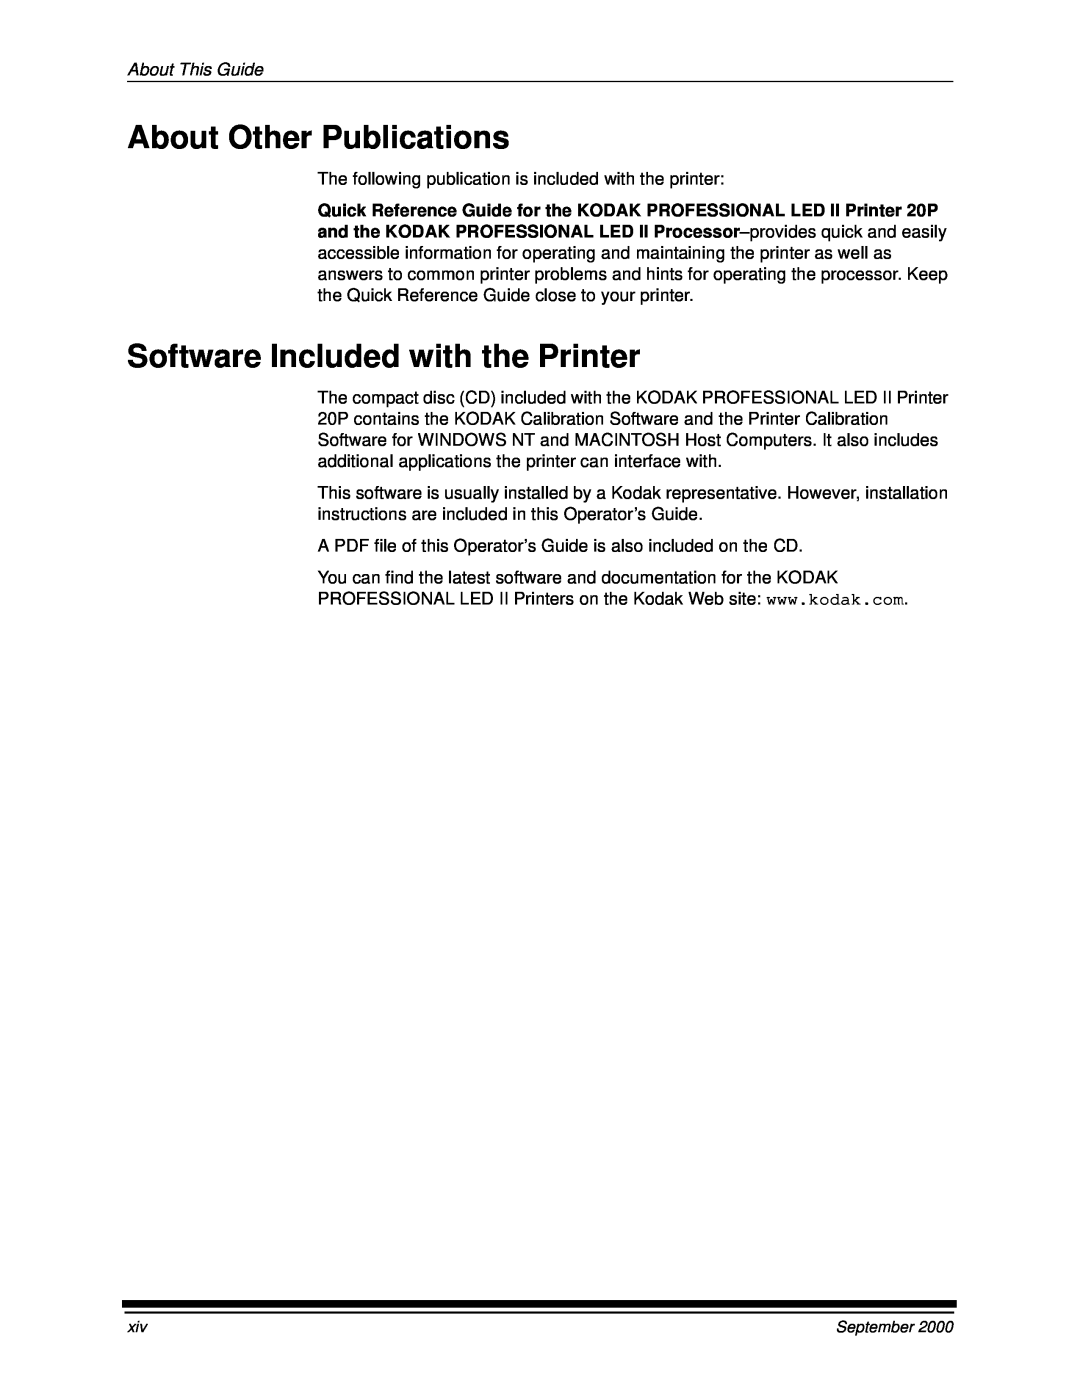 Kodak 20P manual About Other Publications, Software Included with the Printer, About This Guide 